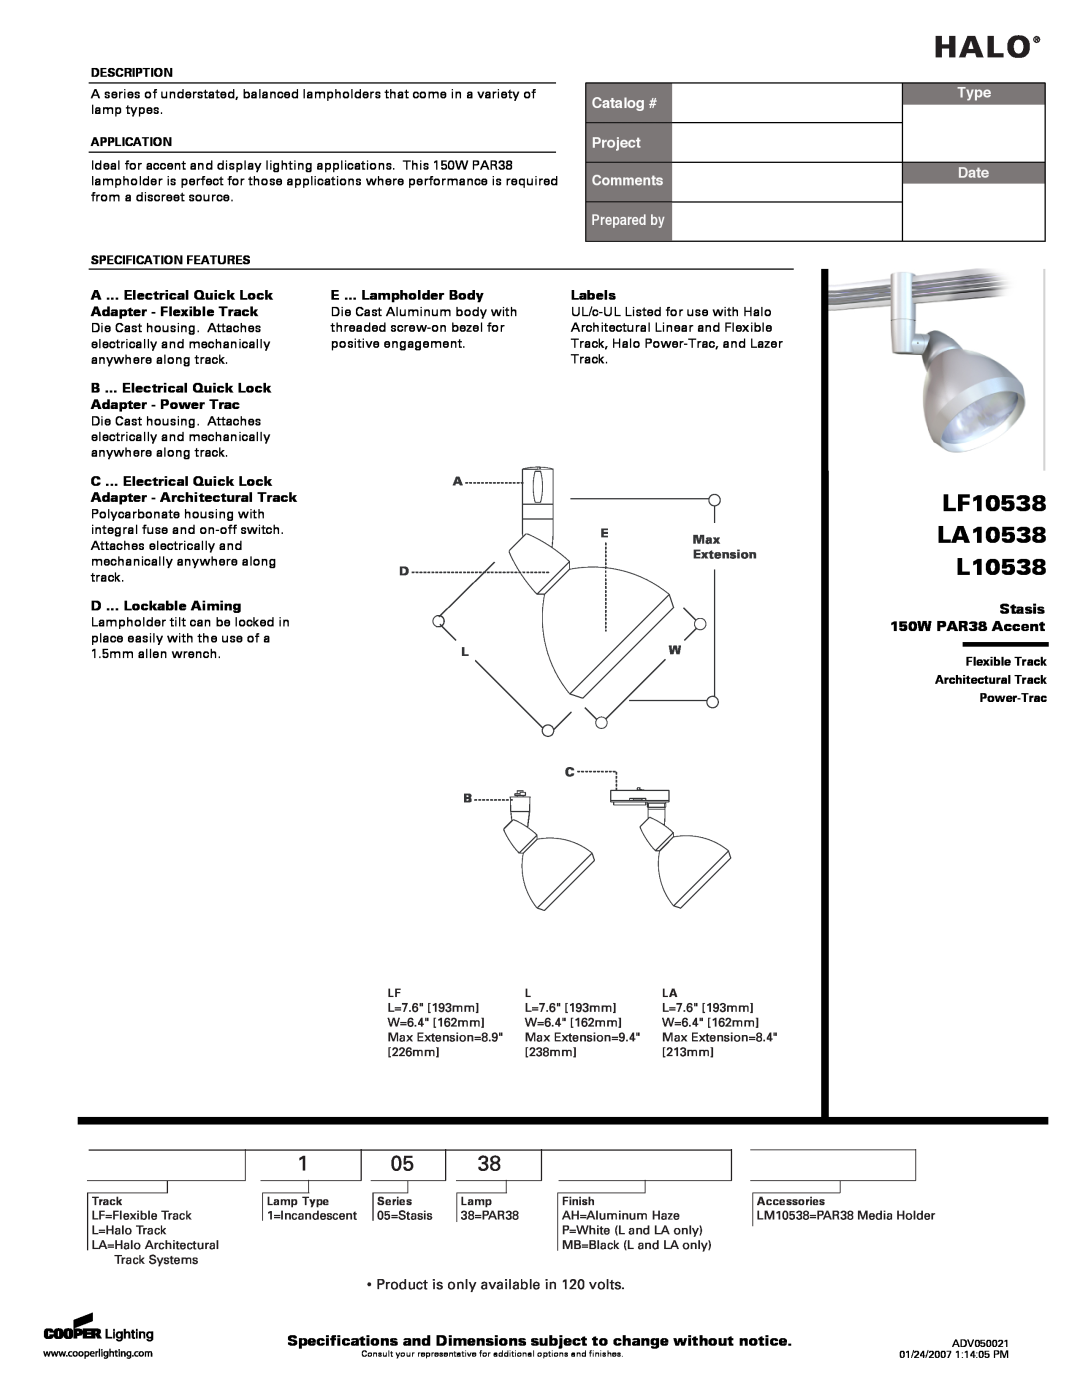 Cooper Lighting specifications Halo, LF10538 LA10538 L10538, Catalog #, Project Comments, Prepared by, Type, Date 